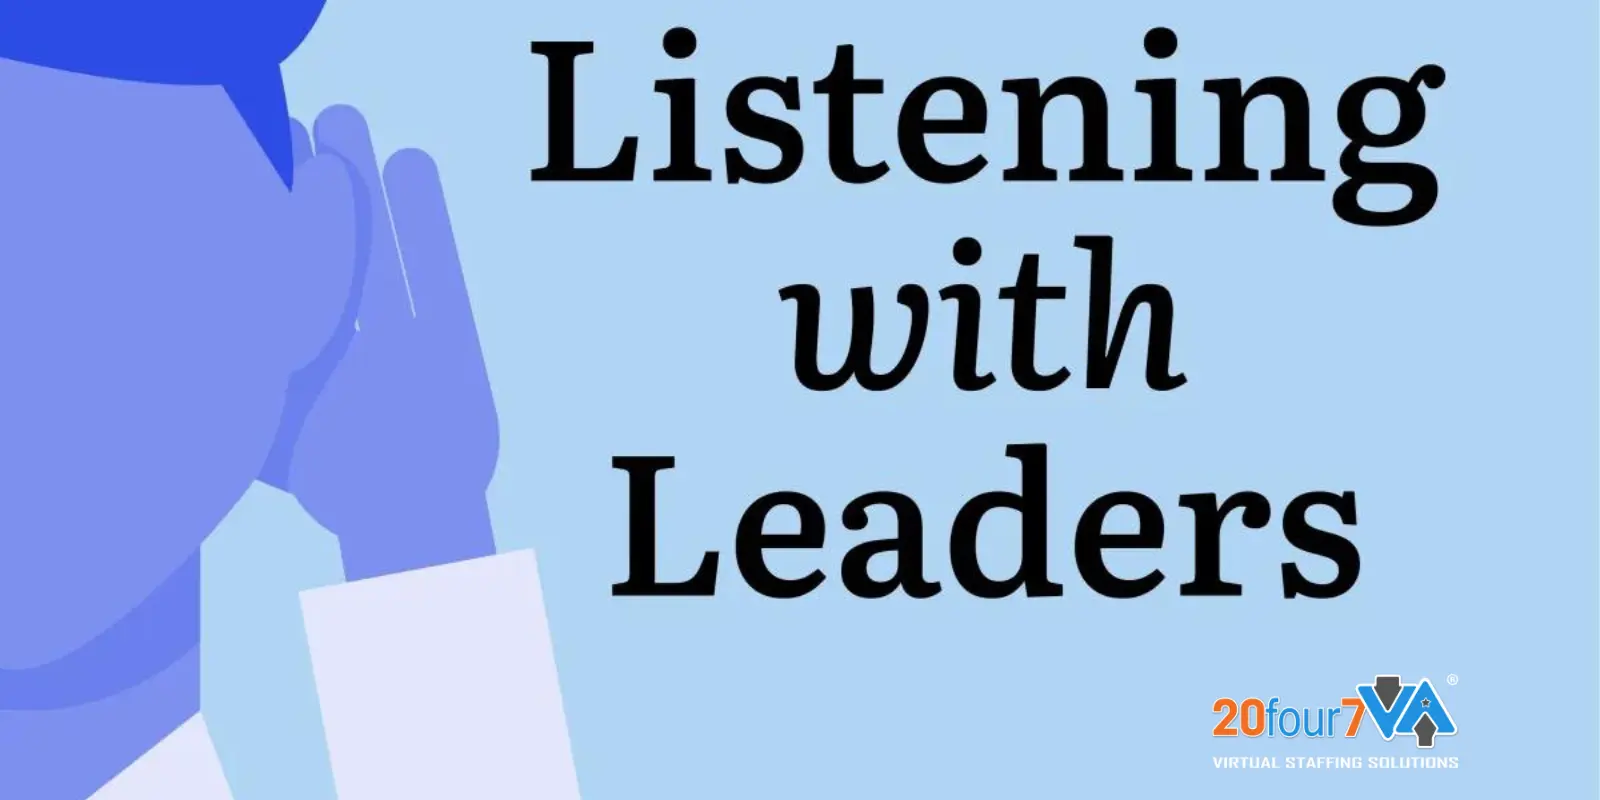 Listening with leaders